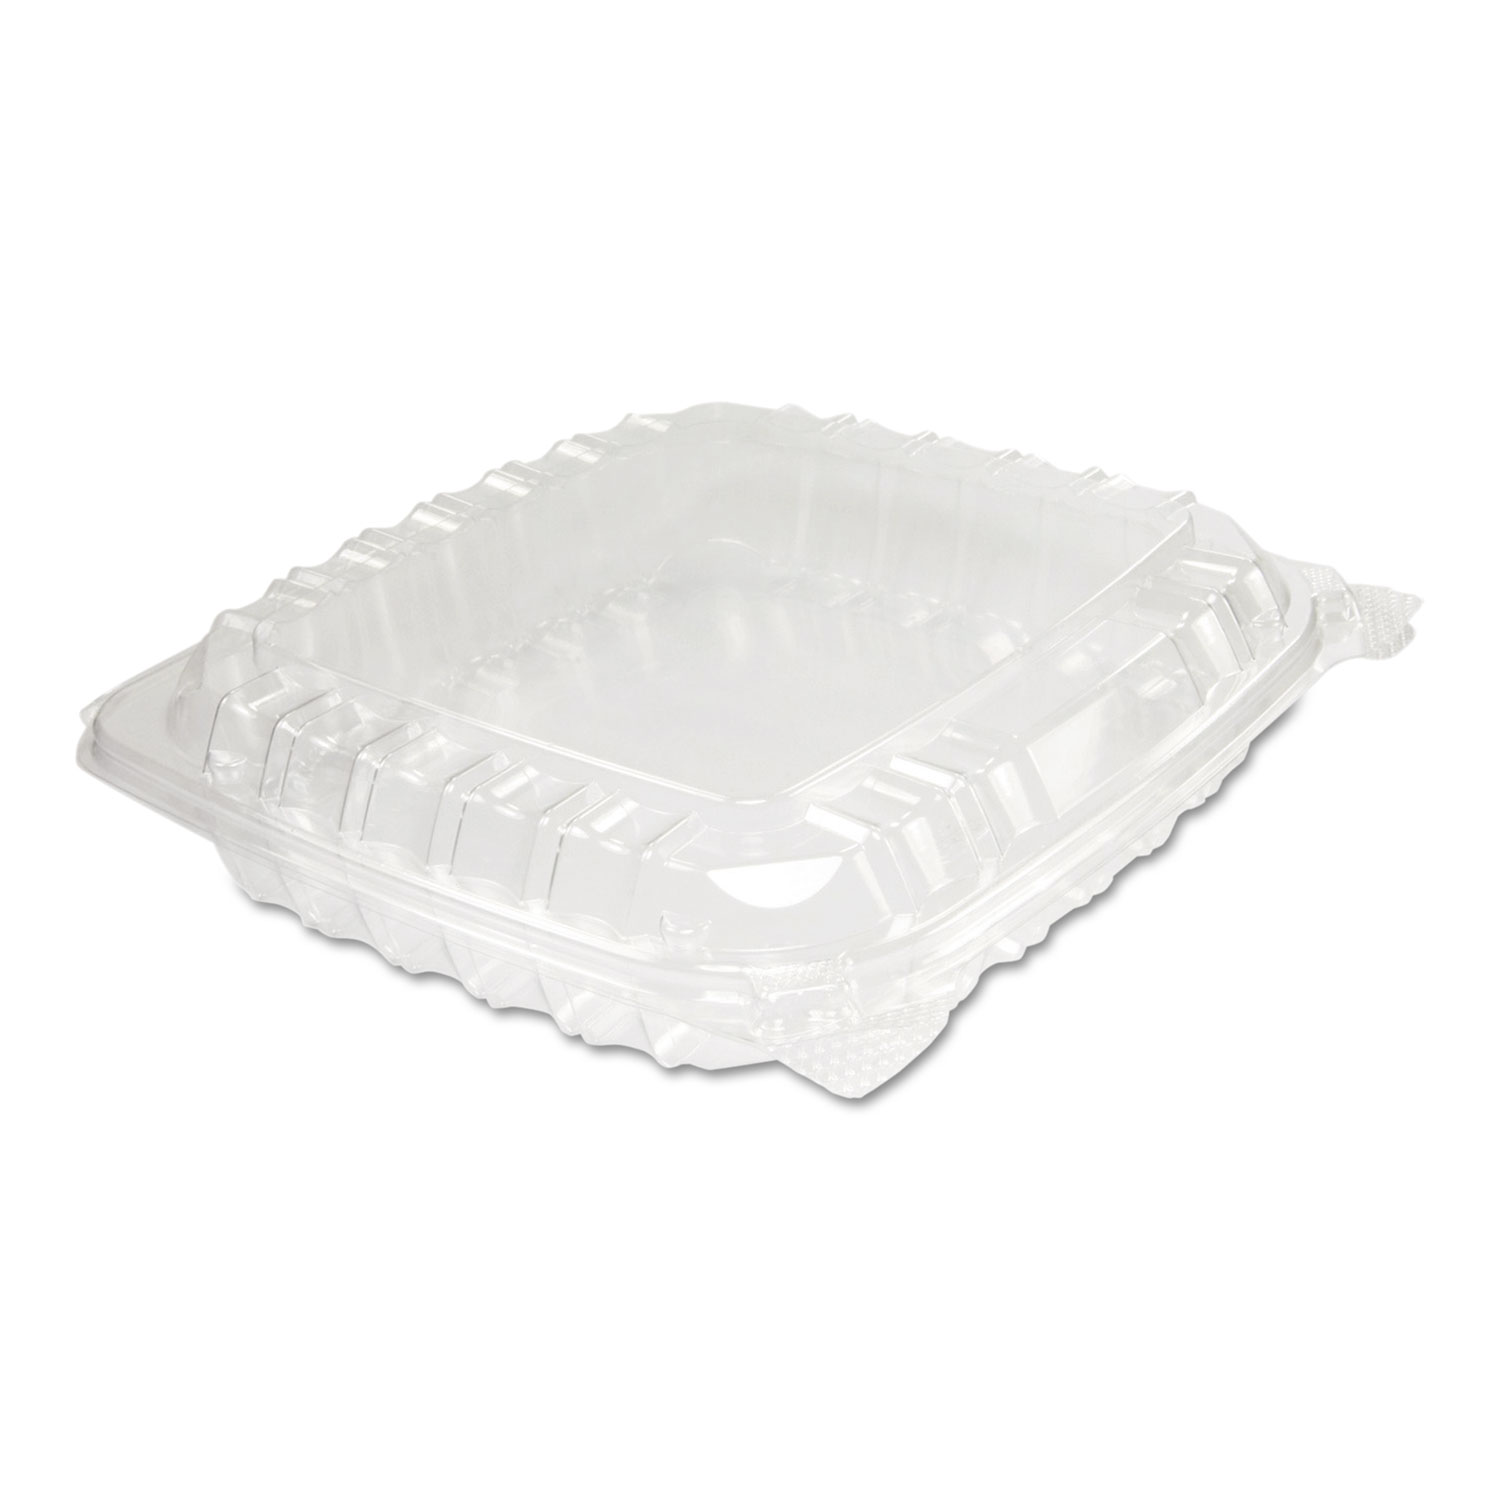  Dart C89PST1 ClearSeal Plastic Hinged Container, 8-5/16 x 8-5/16 x 2, Clear, 125/BG, 2 BG/CT (DCCC89PST1) 